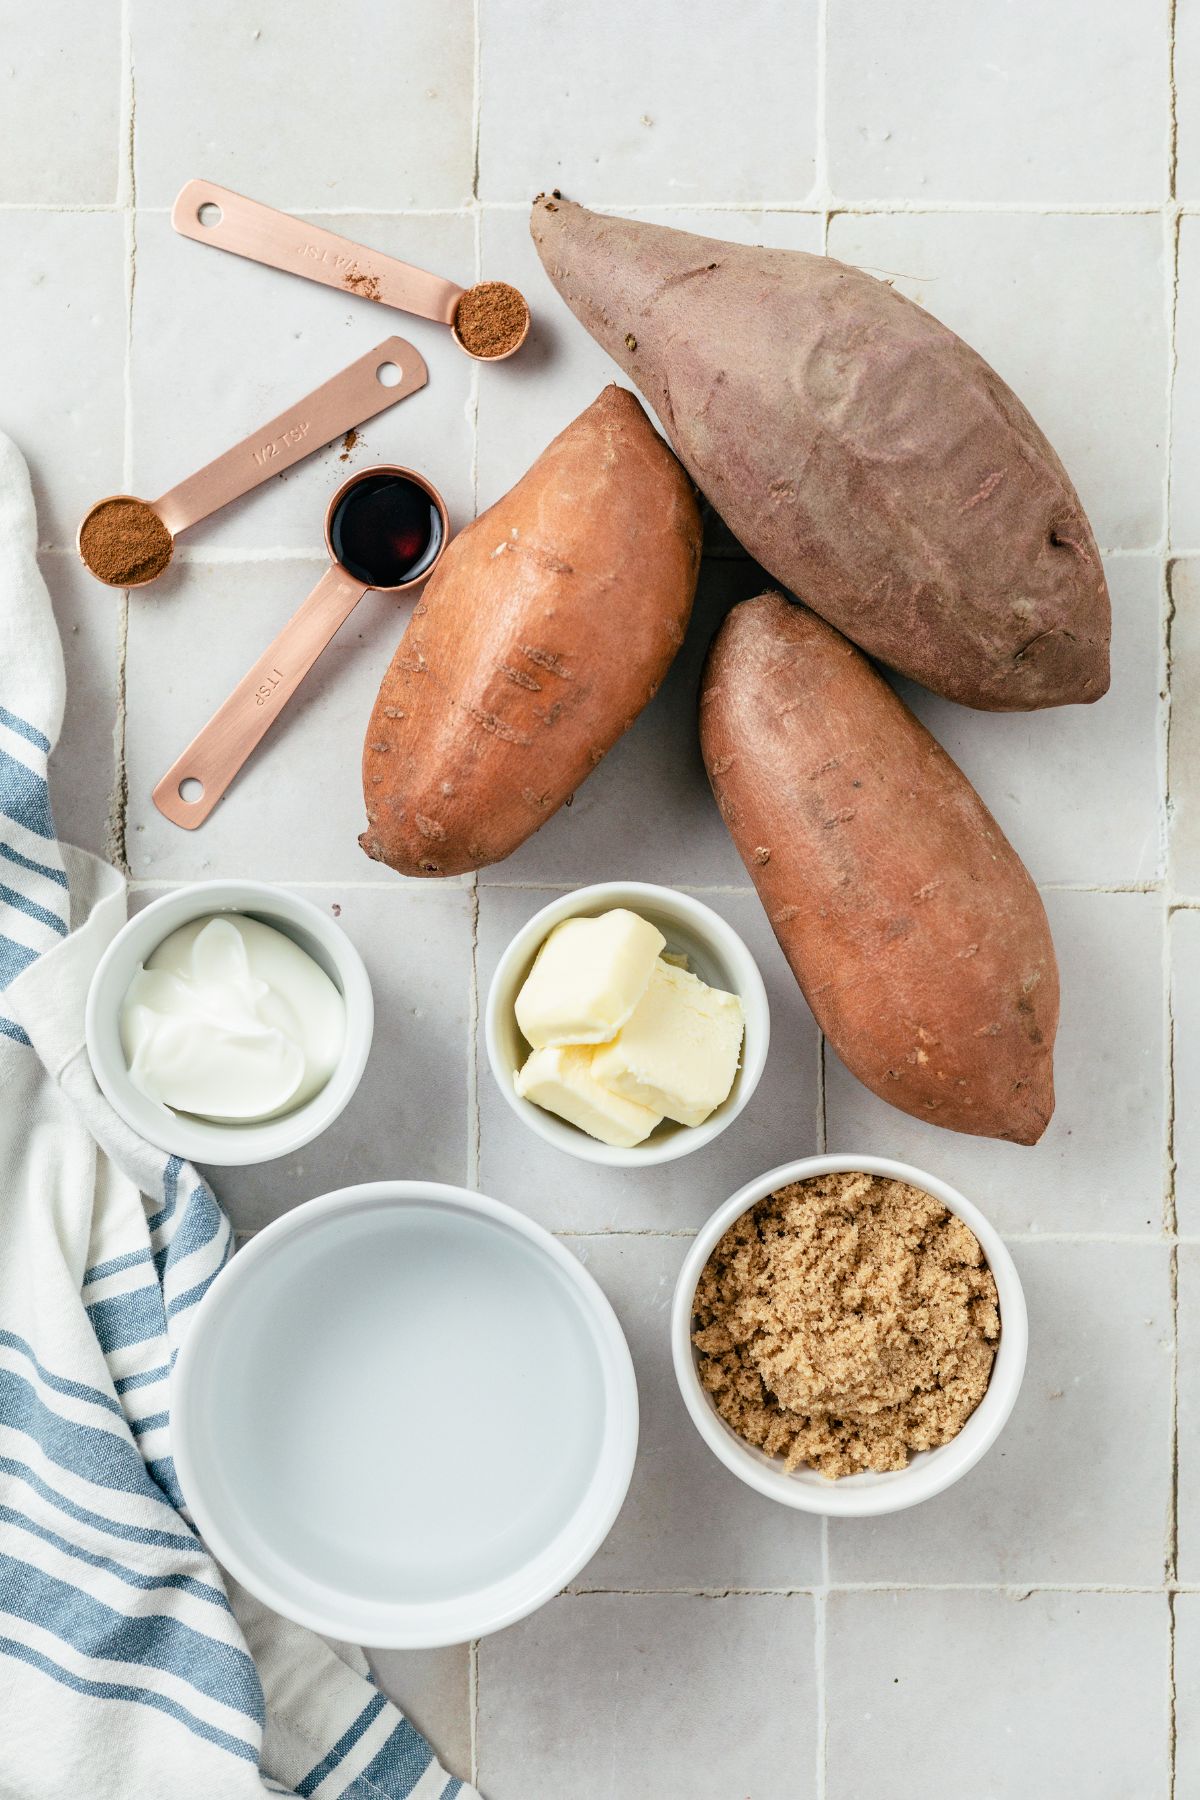 ingredients needed to make whipped sweet potatoes: sweet potatoes, water, butter, vanilla extract, nutmeg, cinnamon, brown sugar and sour cream on separate bowls and spoons